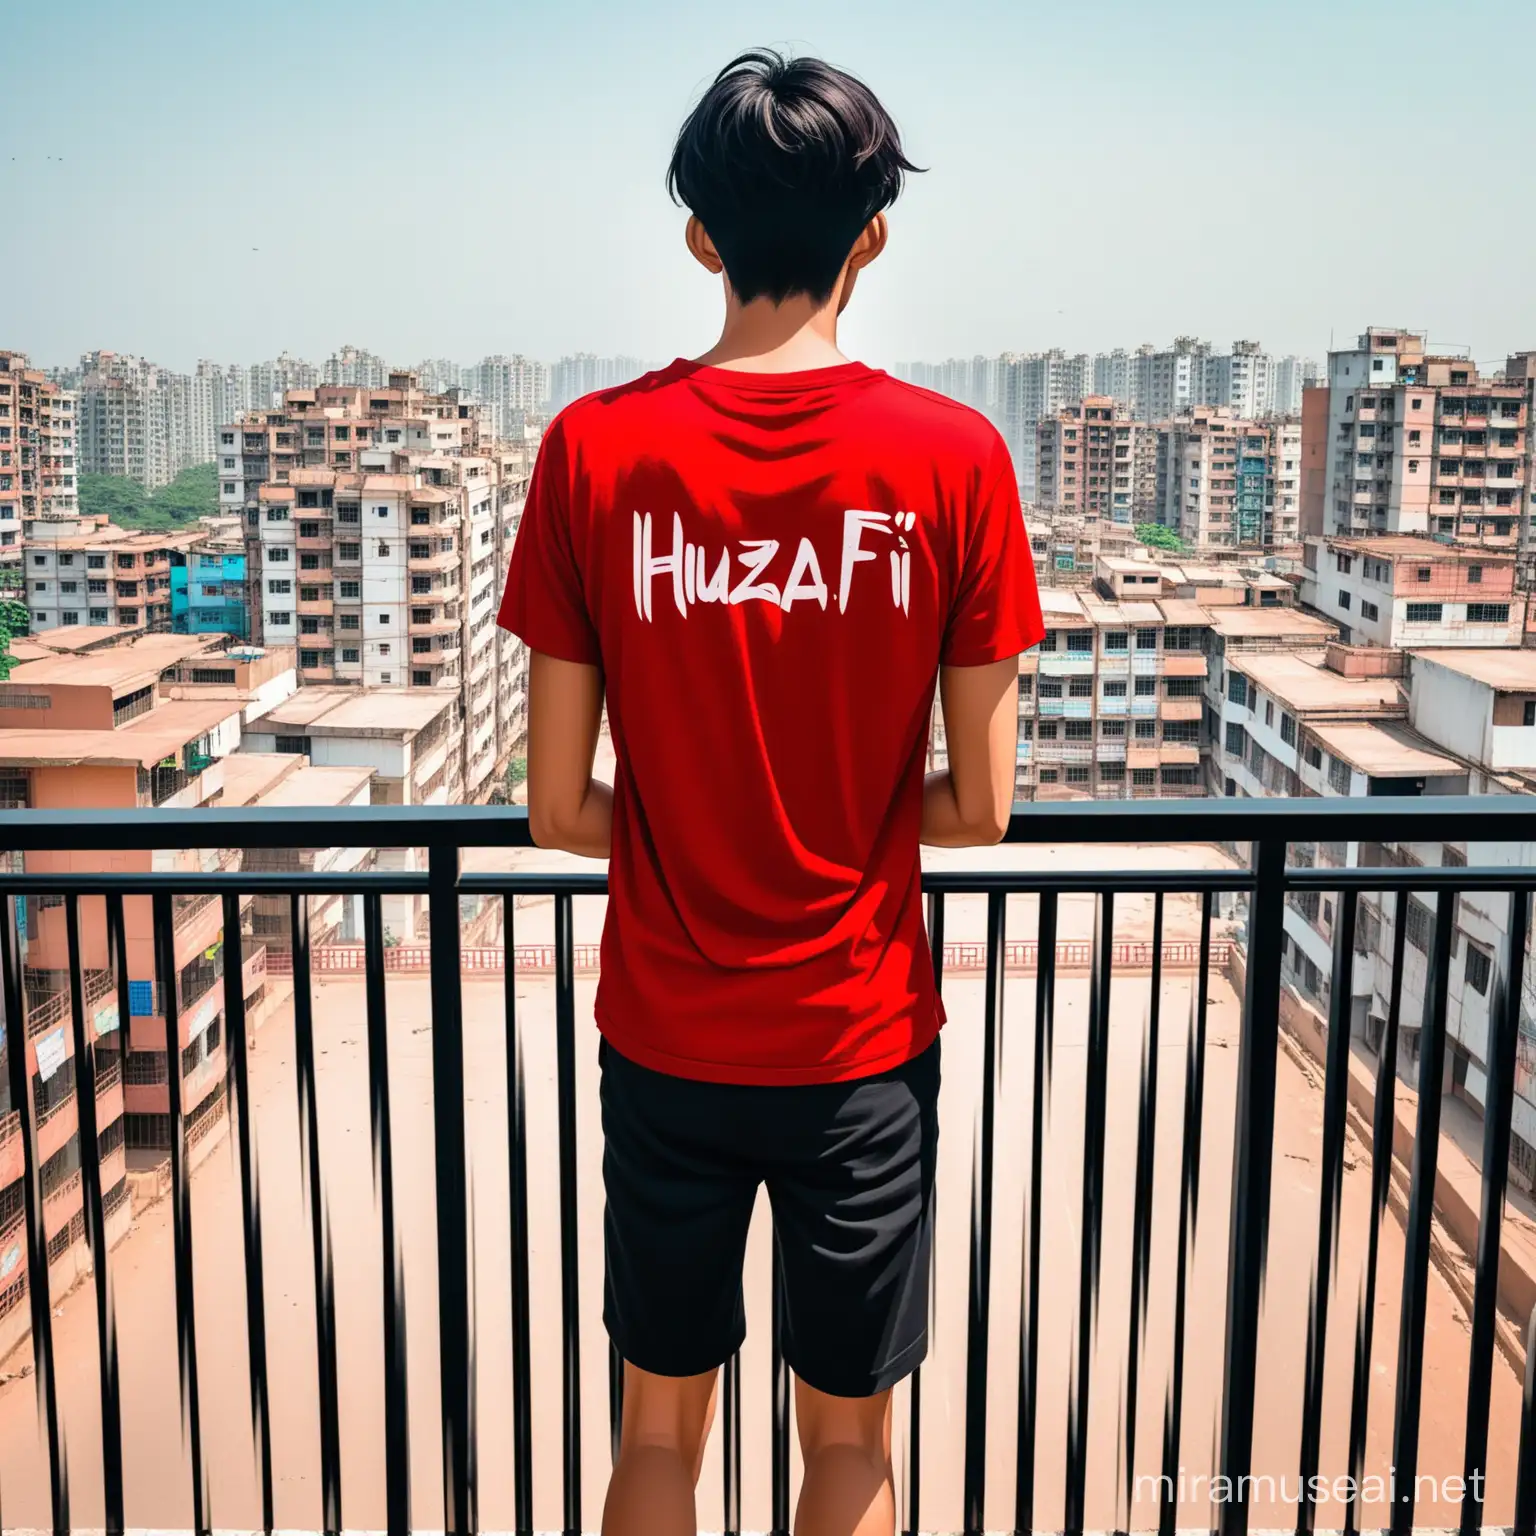 Generate an image of a 23-year-old man with his back facing the viewer, wearing a red t-shirt with the name HUZAIFA clearly written on it.  He is standing on a balcony, looking out at the road of  developed city, lost in deep thought